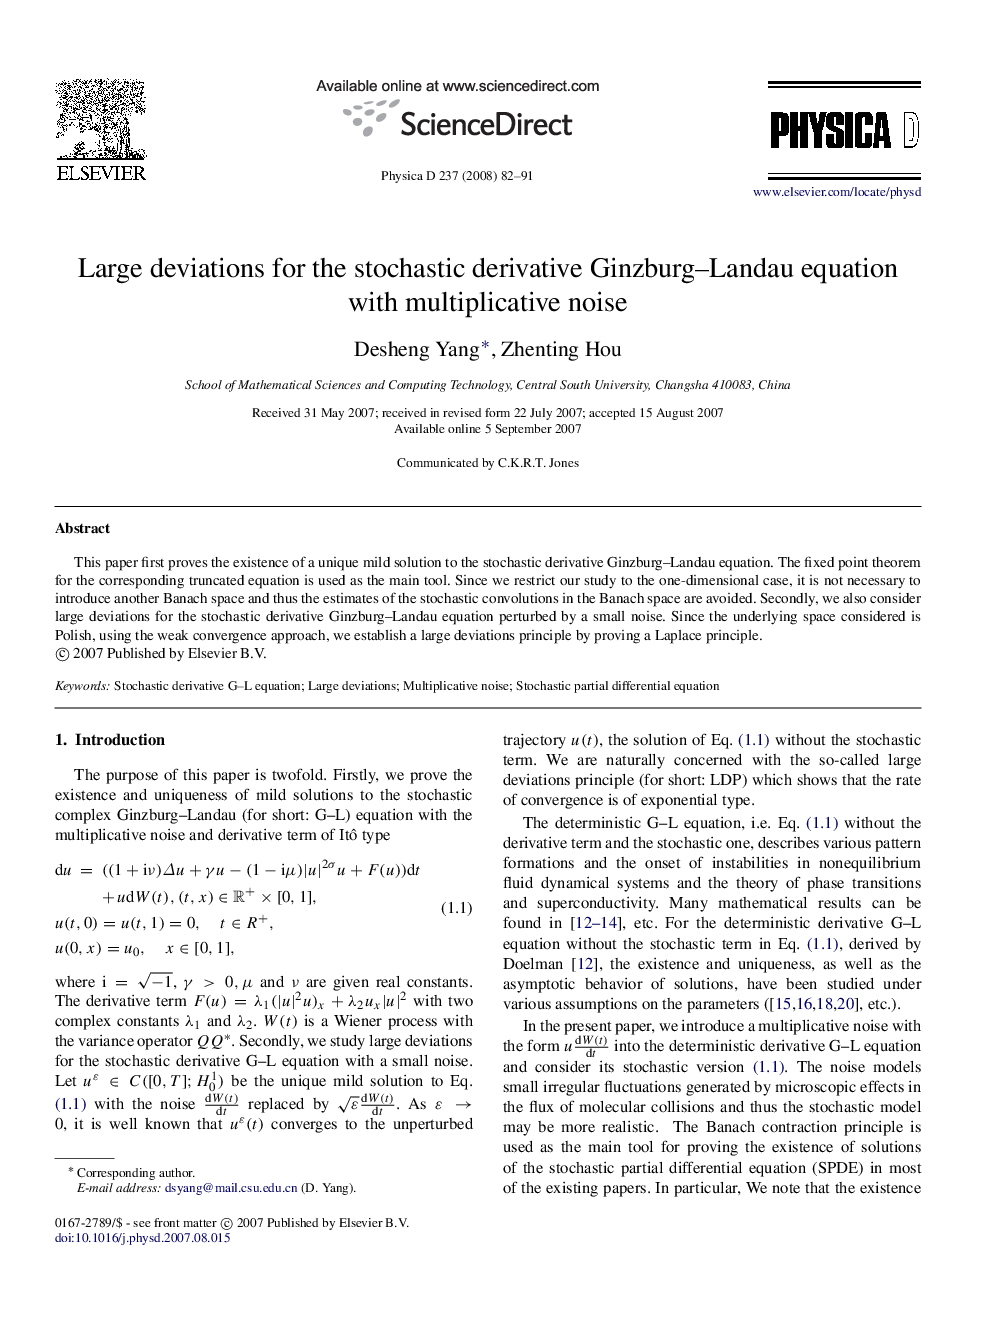 Large deviations for the stochastic derivative Ginzburg–Landau equation with multiplicative noise